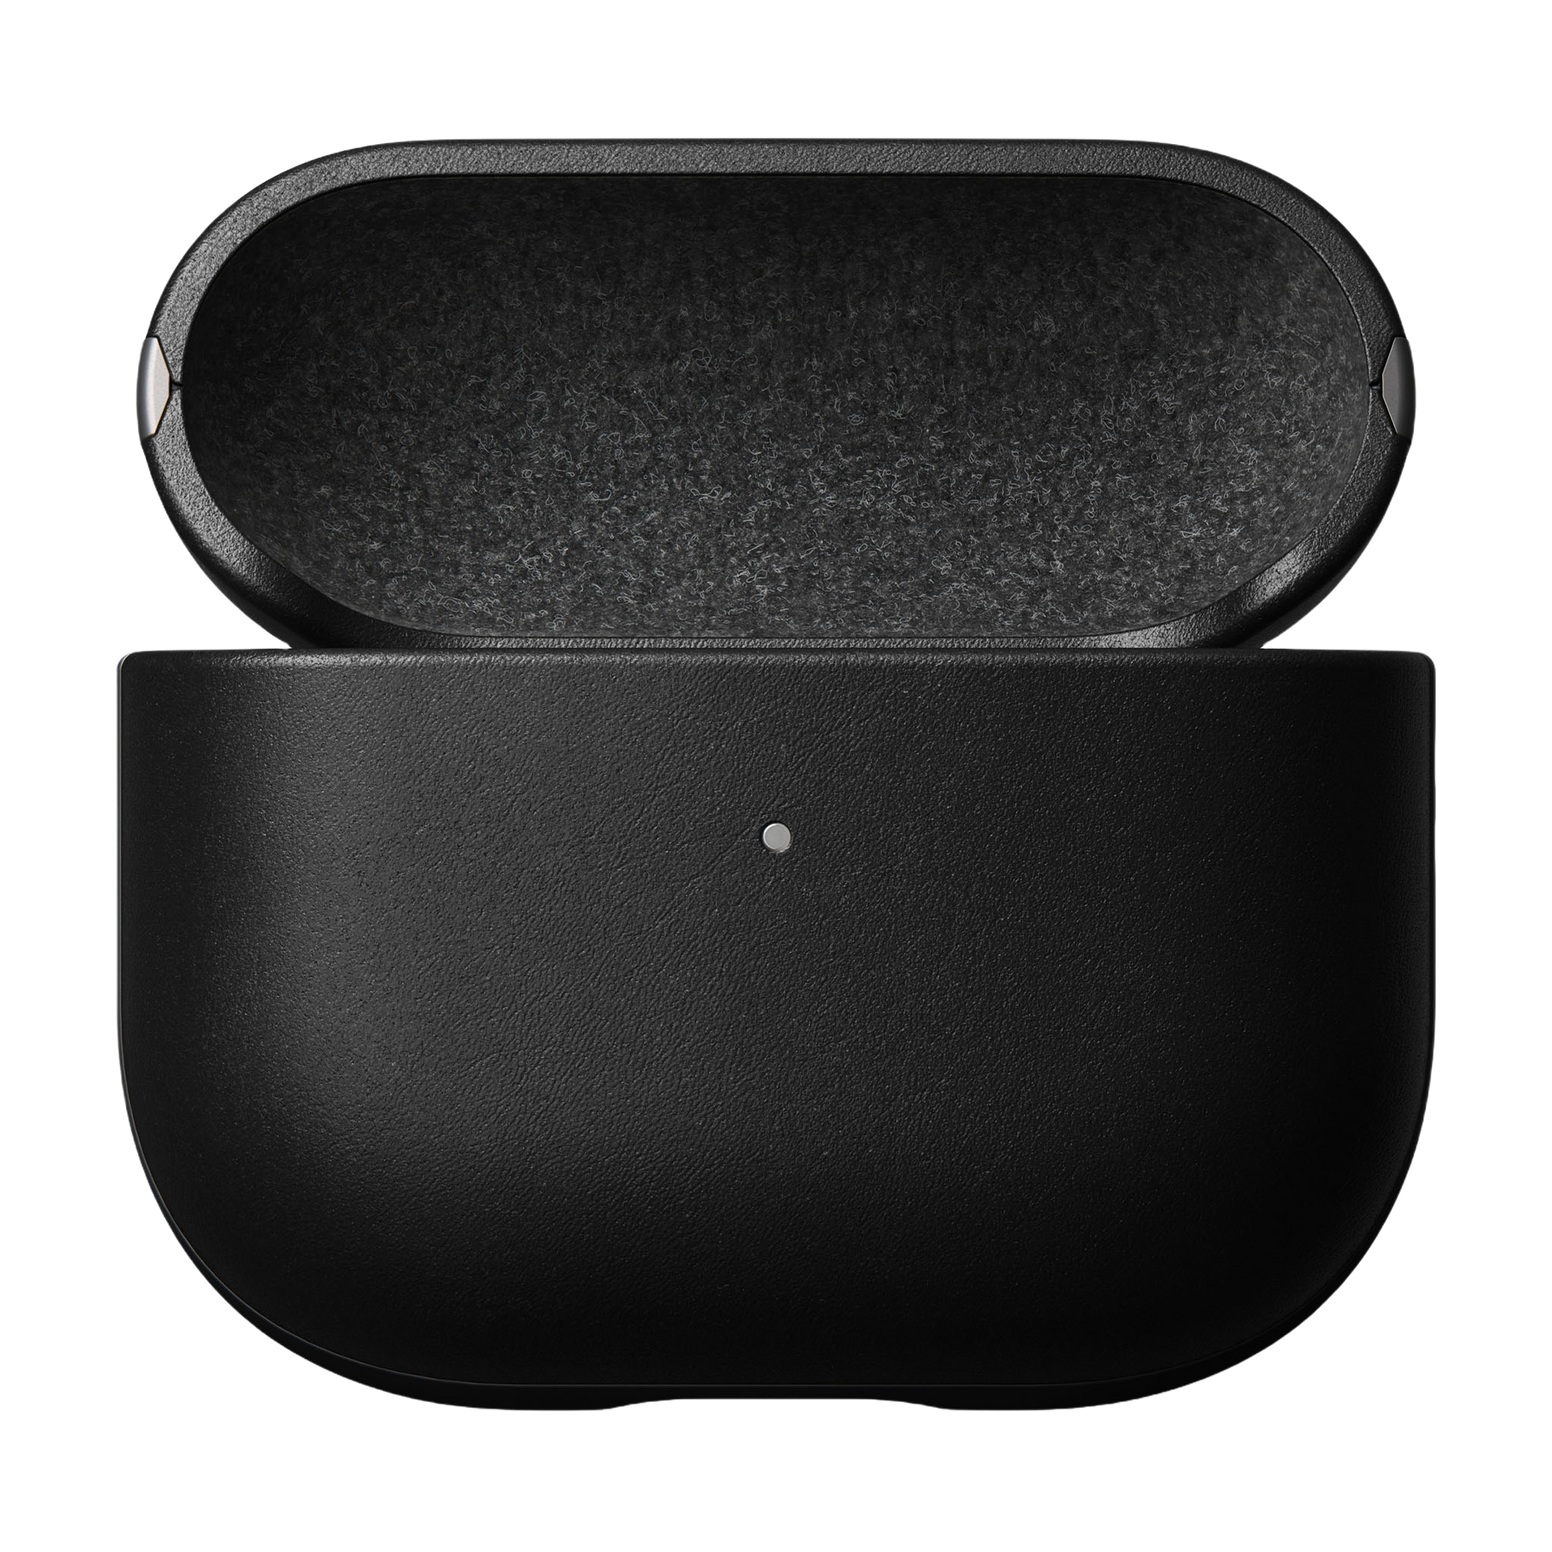 Nomad Modern Leather Case for AirPods (3rd Generation) - Black Horween Leather